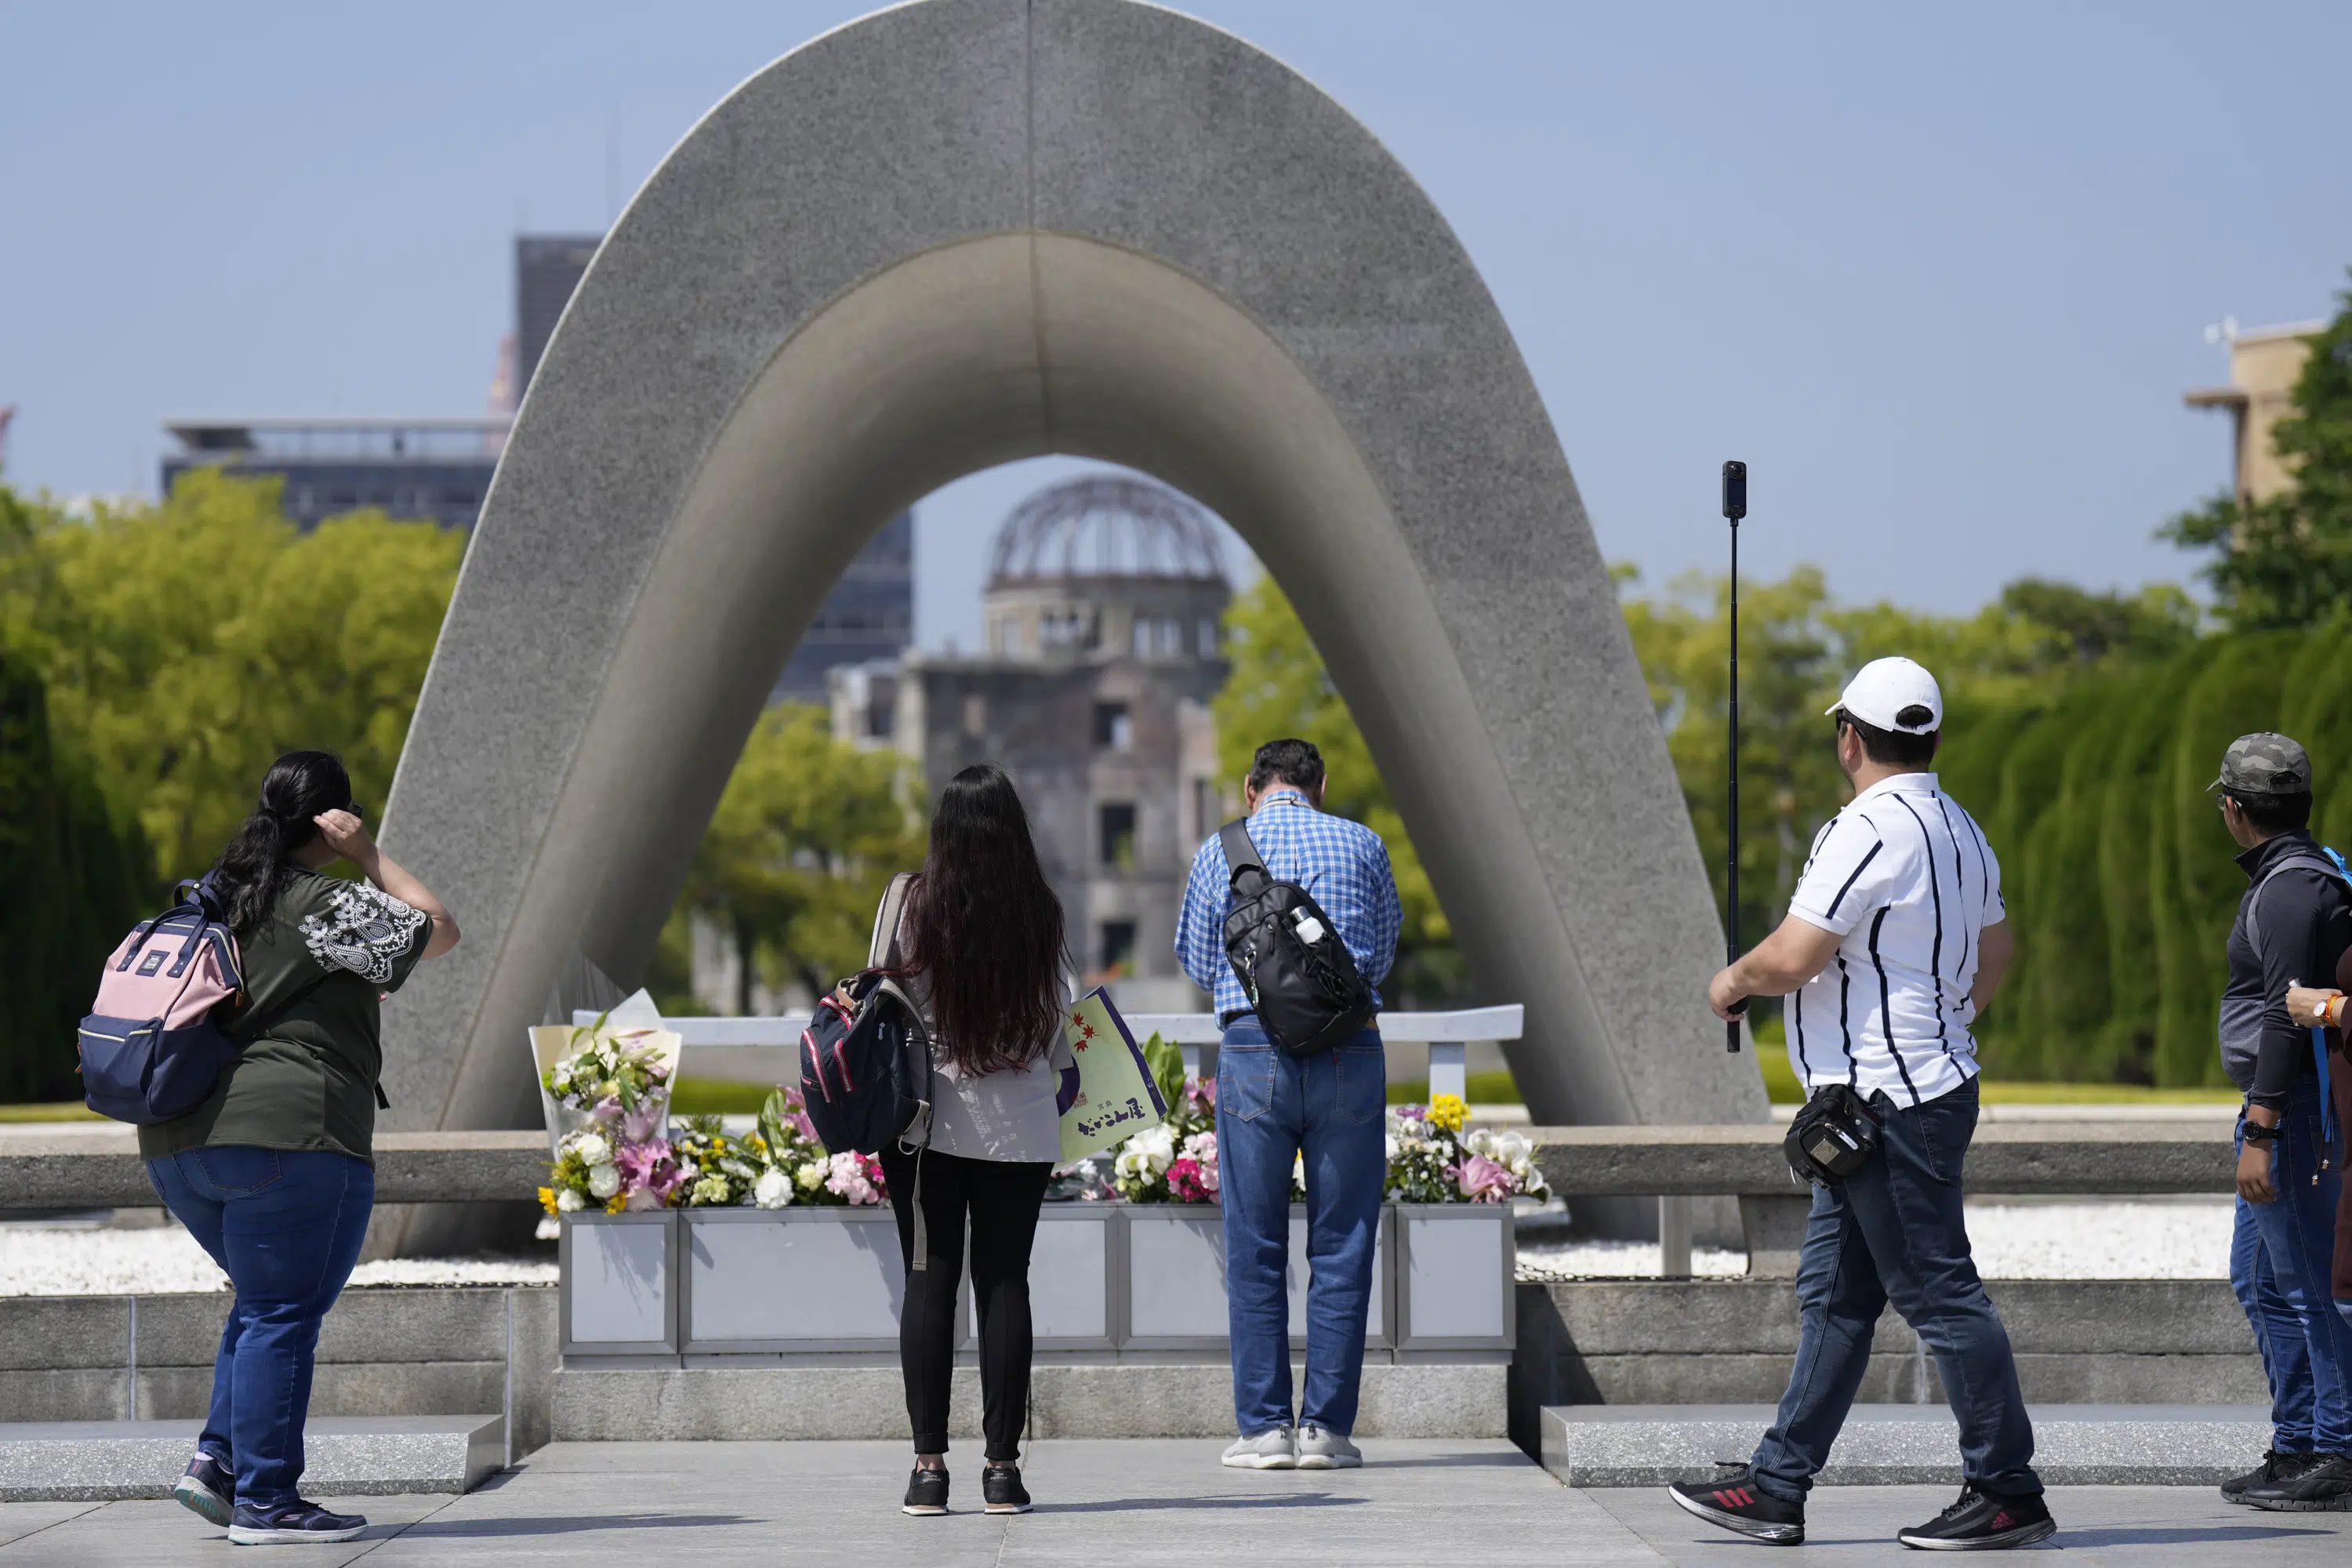 G-7 leaders likely to focus on the war in Ukraine and tensions in Asia at summit in Hiroshima